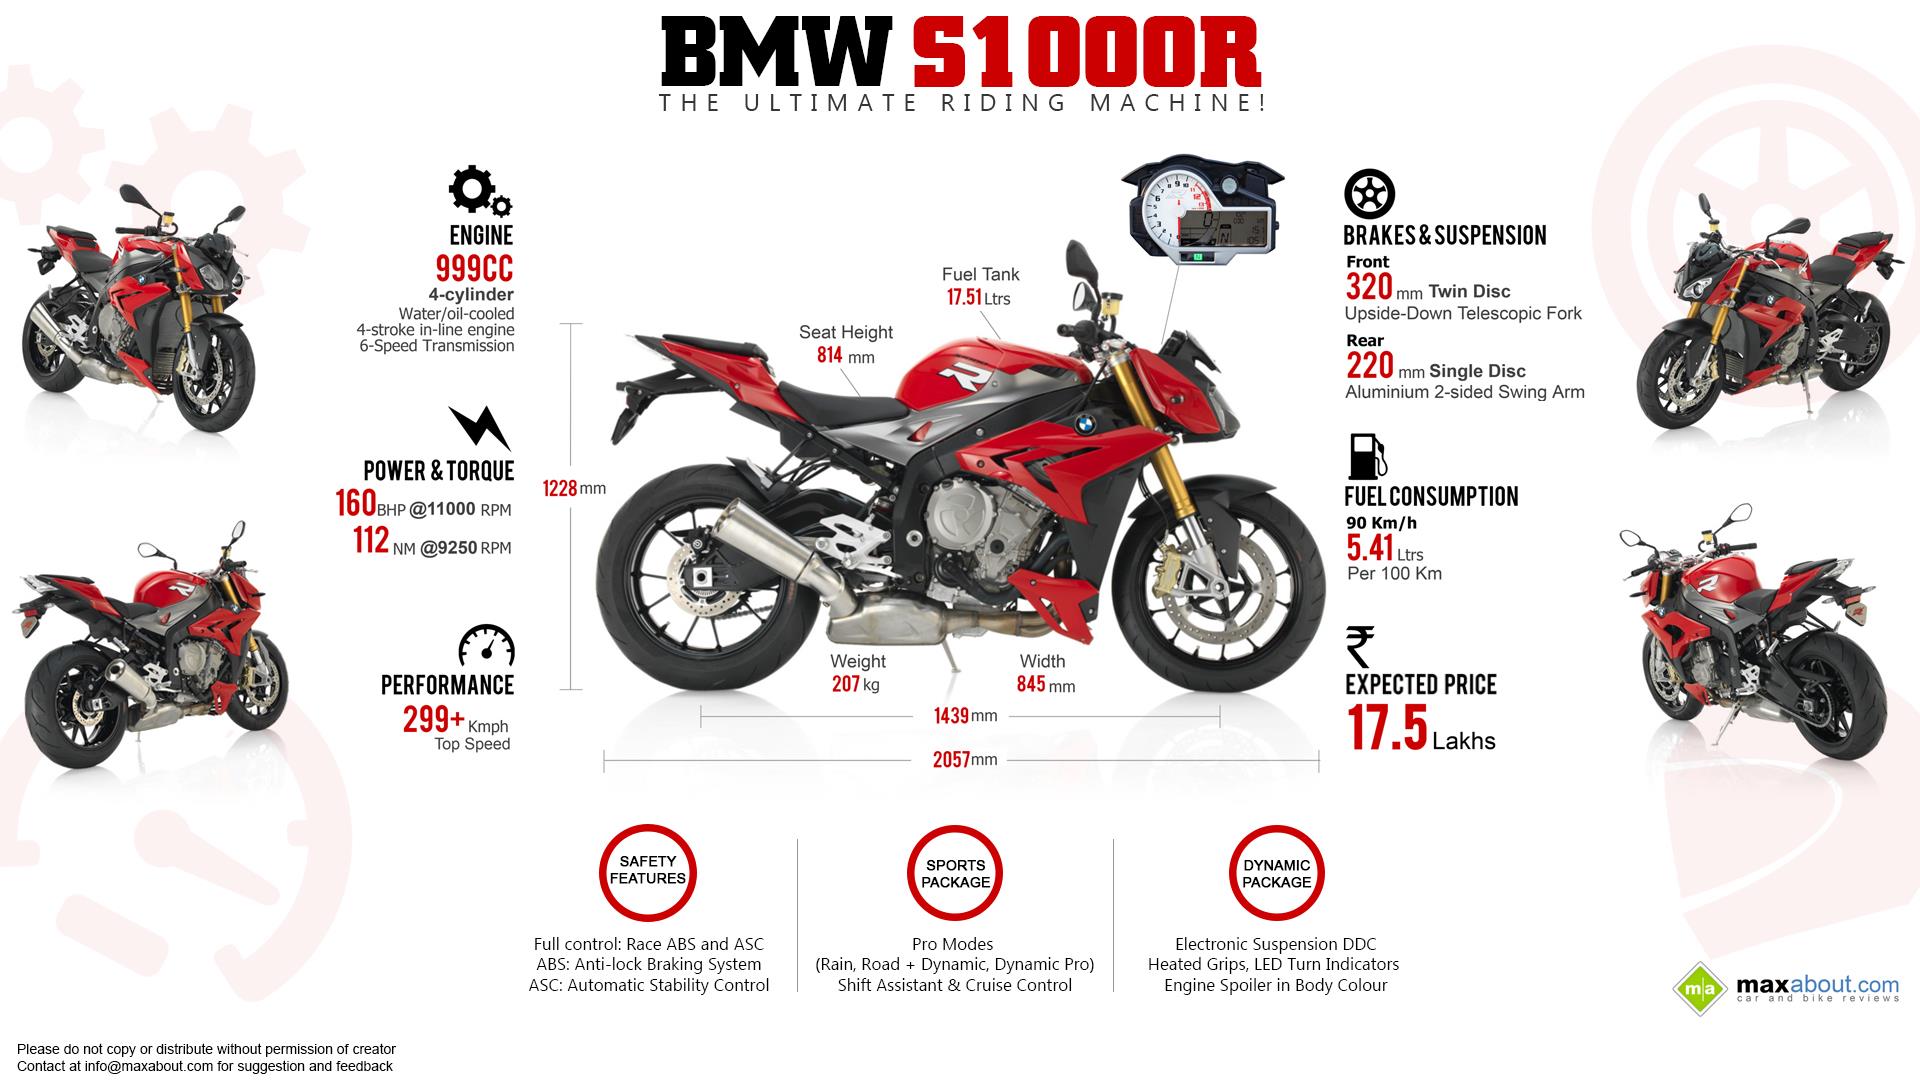 Bmw machine motorcycle riding ultimate #1